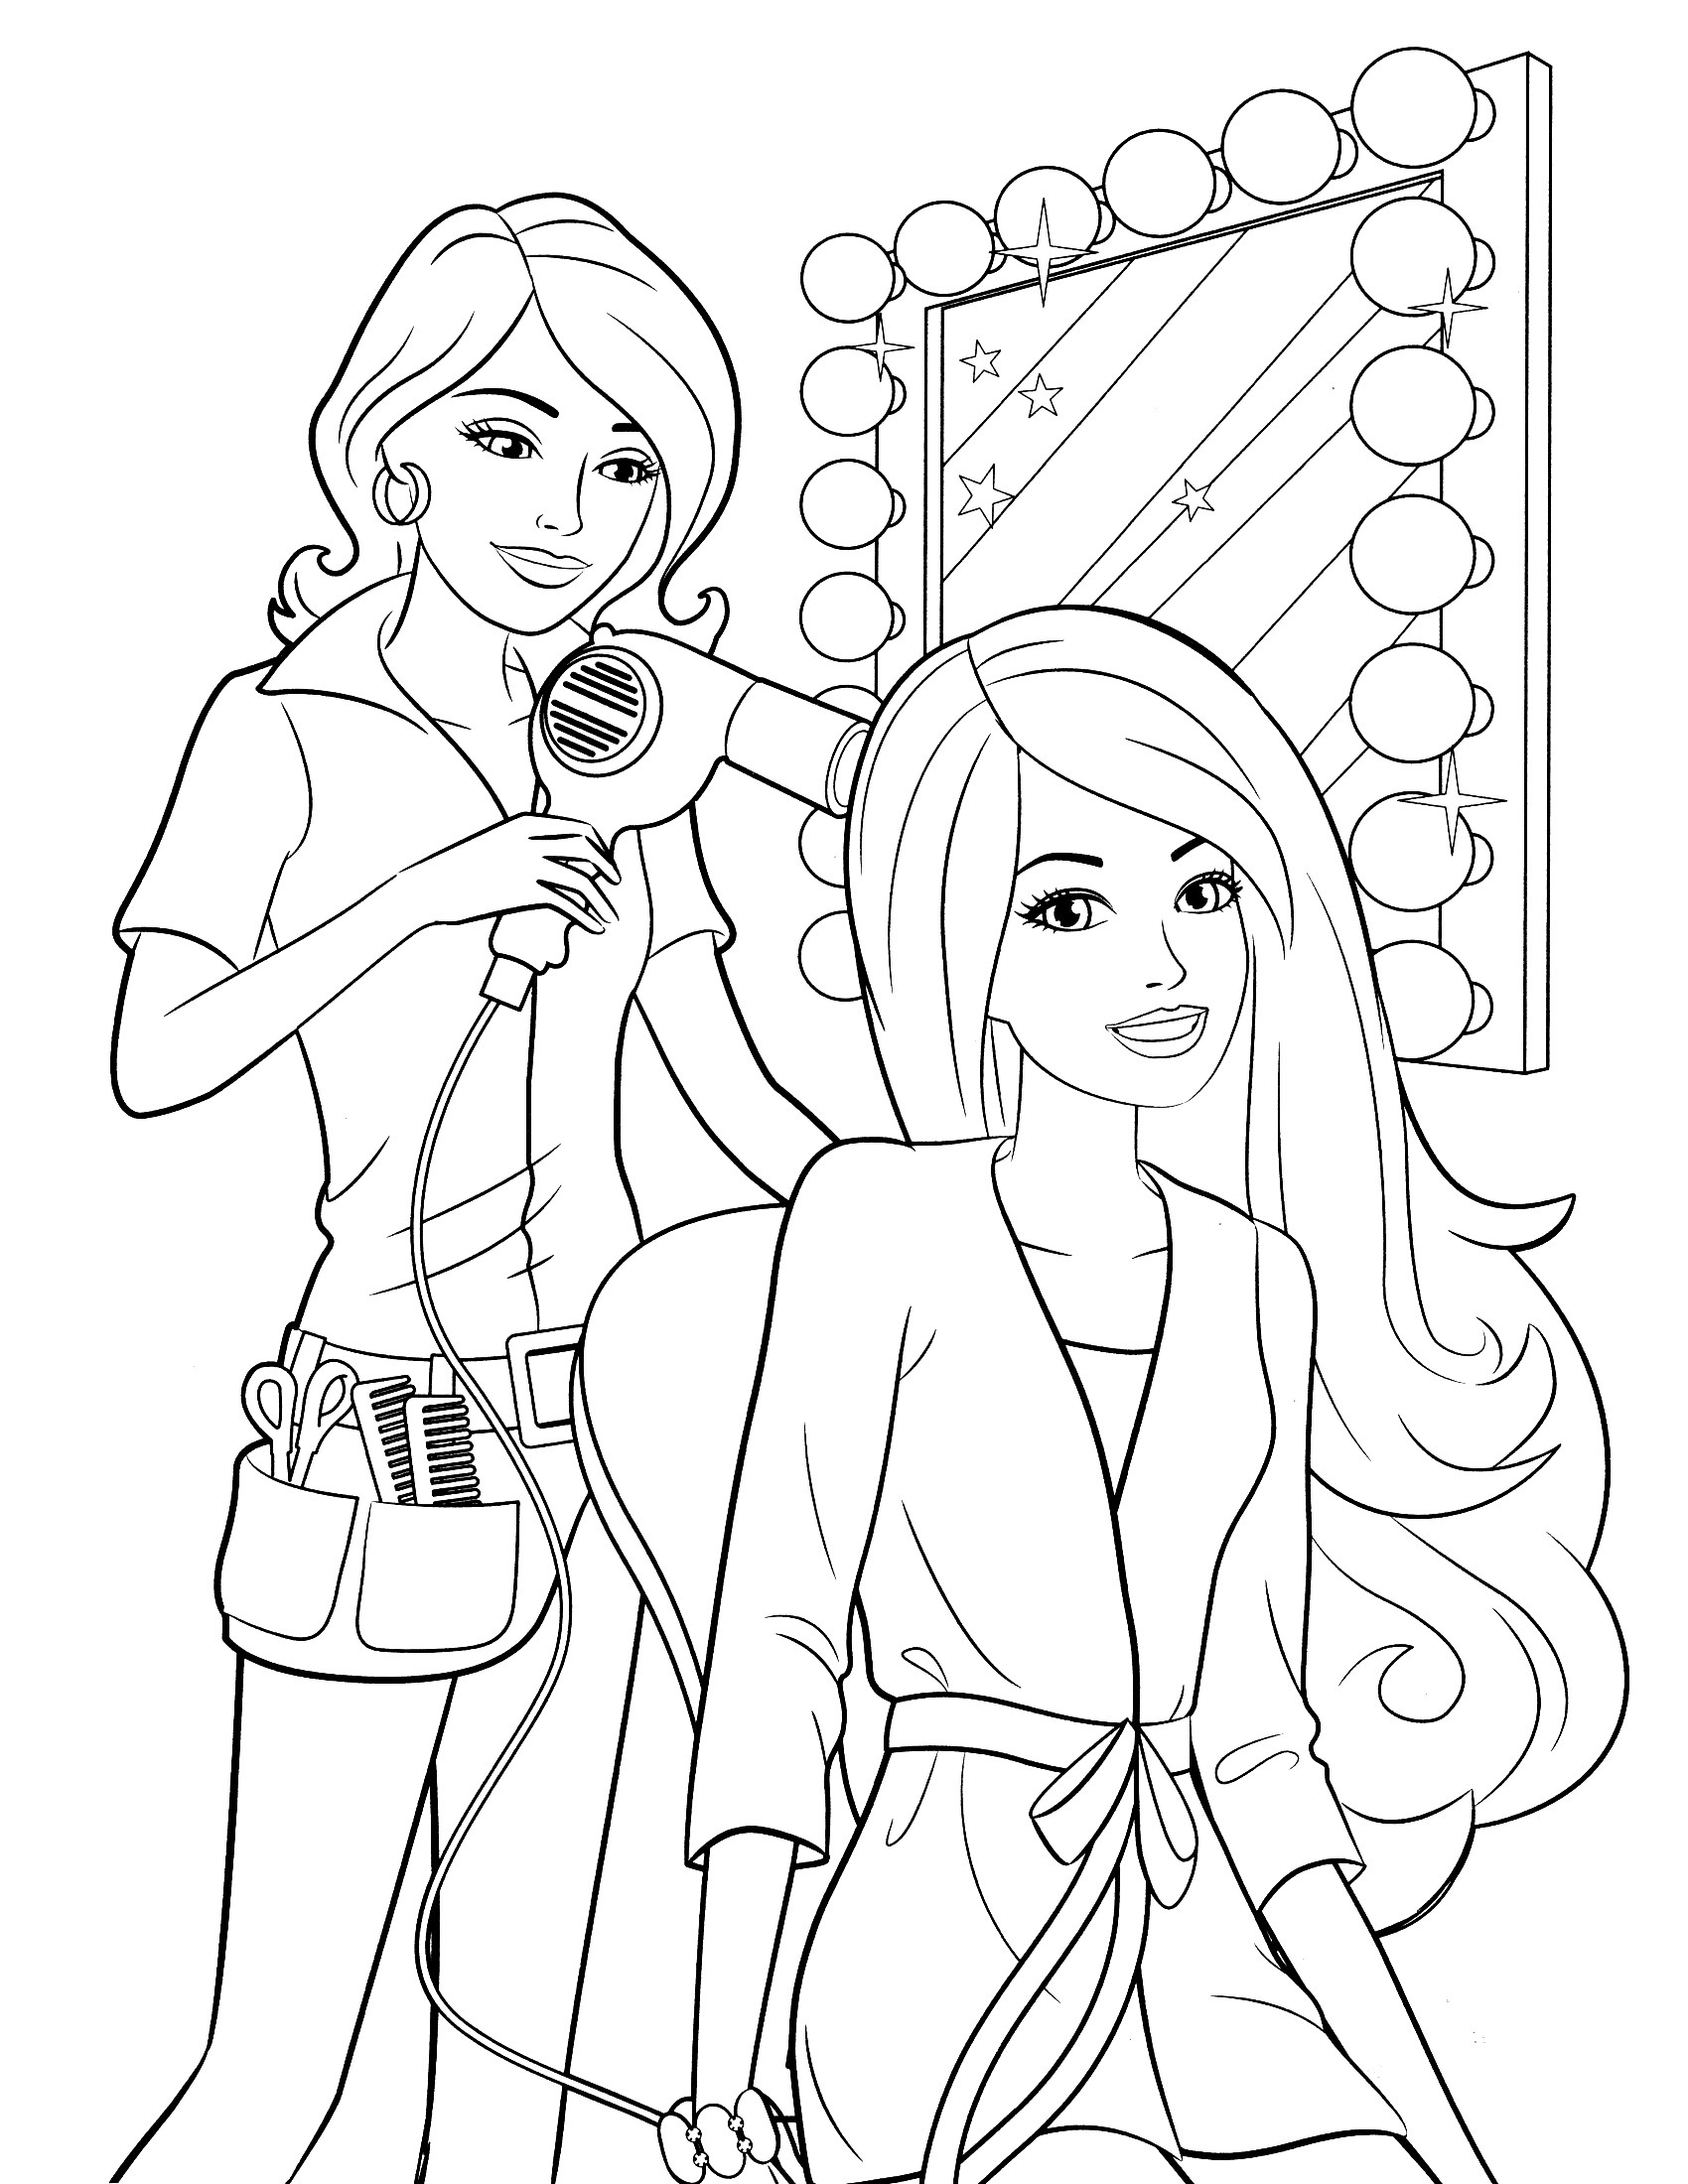 Girl Printable Coloring Pages
 Coloring Pages for Girls Best Coloring Pages For Kids